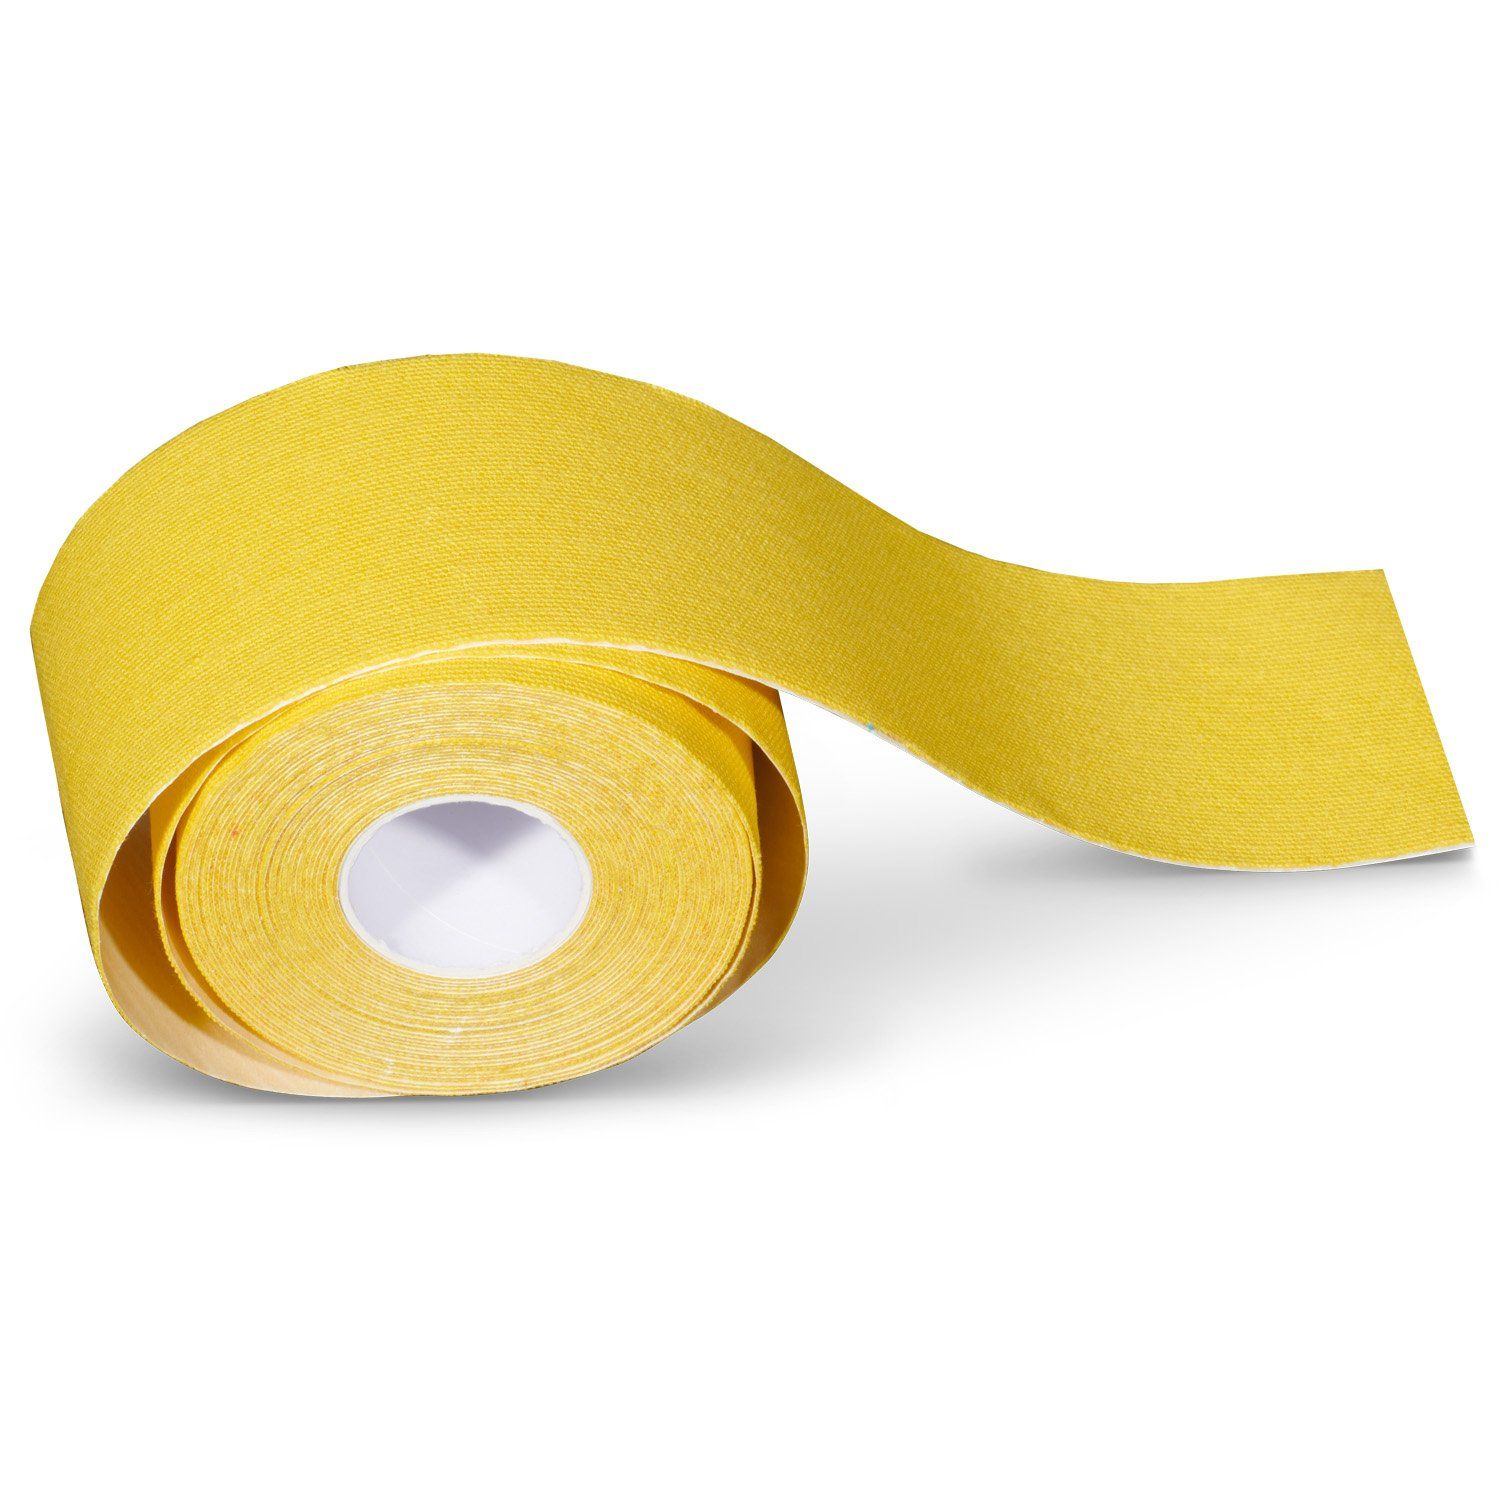 kinesiology tape 4 rolls plus 1 roll for free yellow